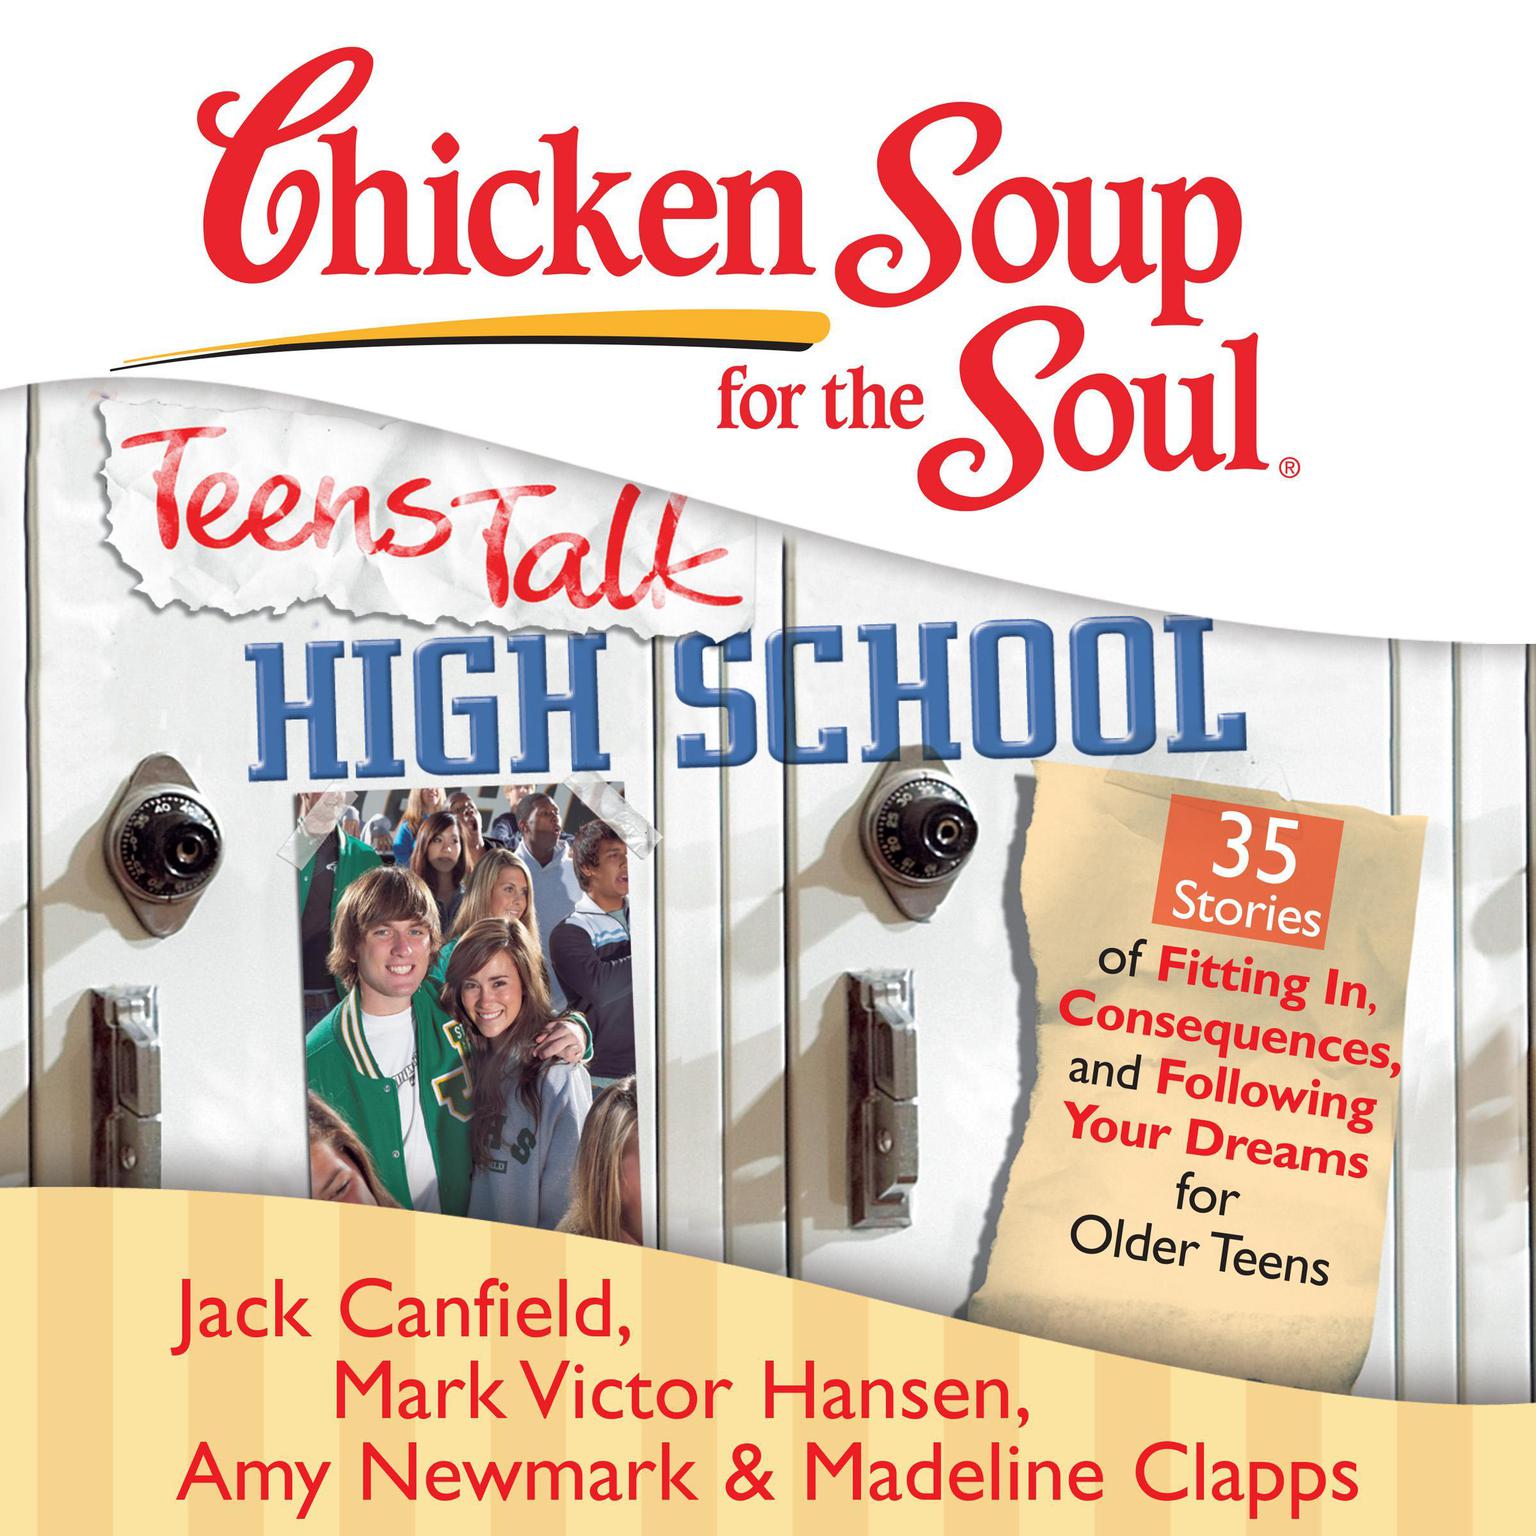 Chicken Soup for the Soul: Teens Talk High School - 35 Stories of Fitting In, Consequences, and Following Your Dreams for Older Teens Audiobook, by Jack Canfield